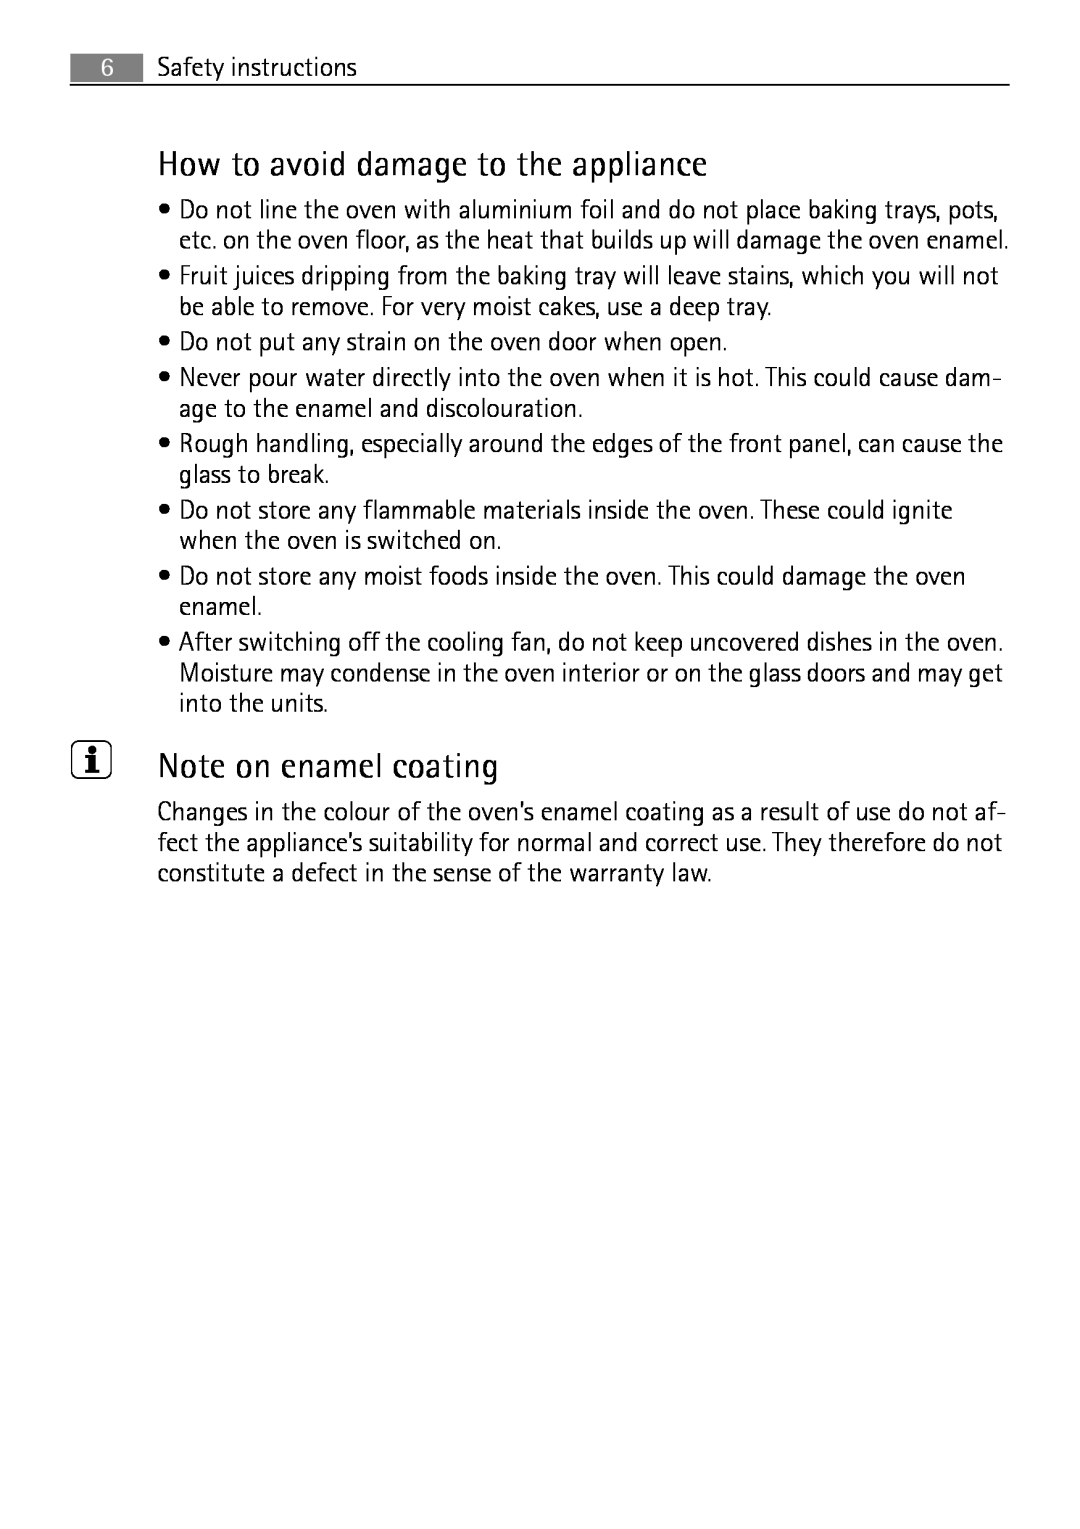 Electrolux B2100-5 user manual How to avoid damage to the appliance, Note on enamel coating 